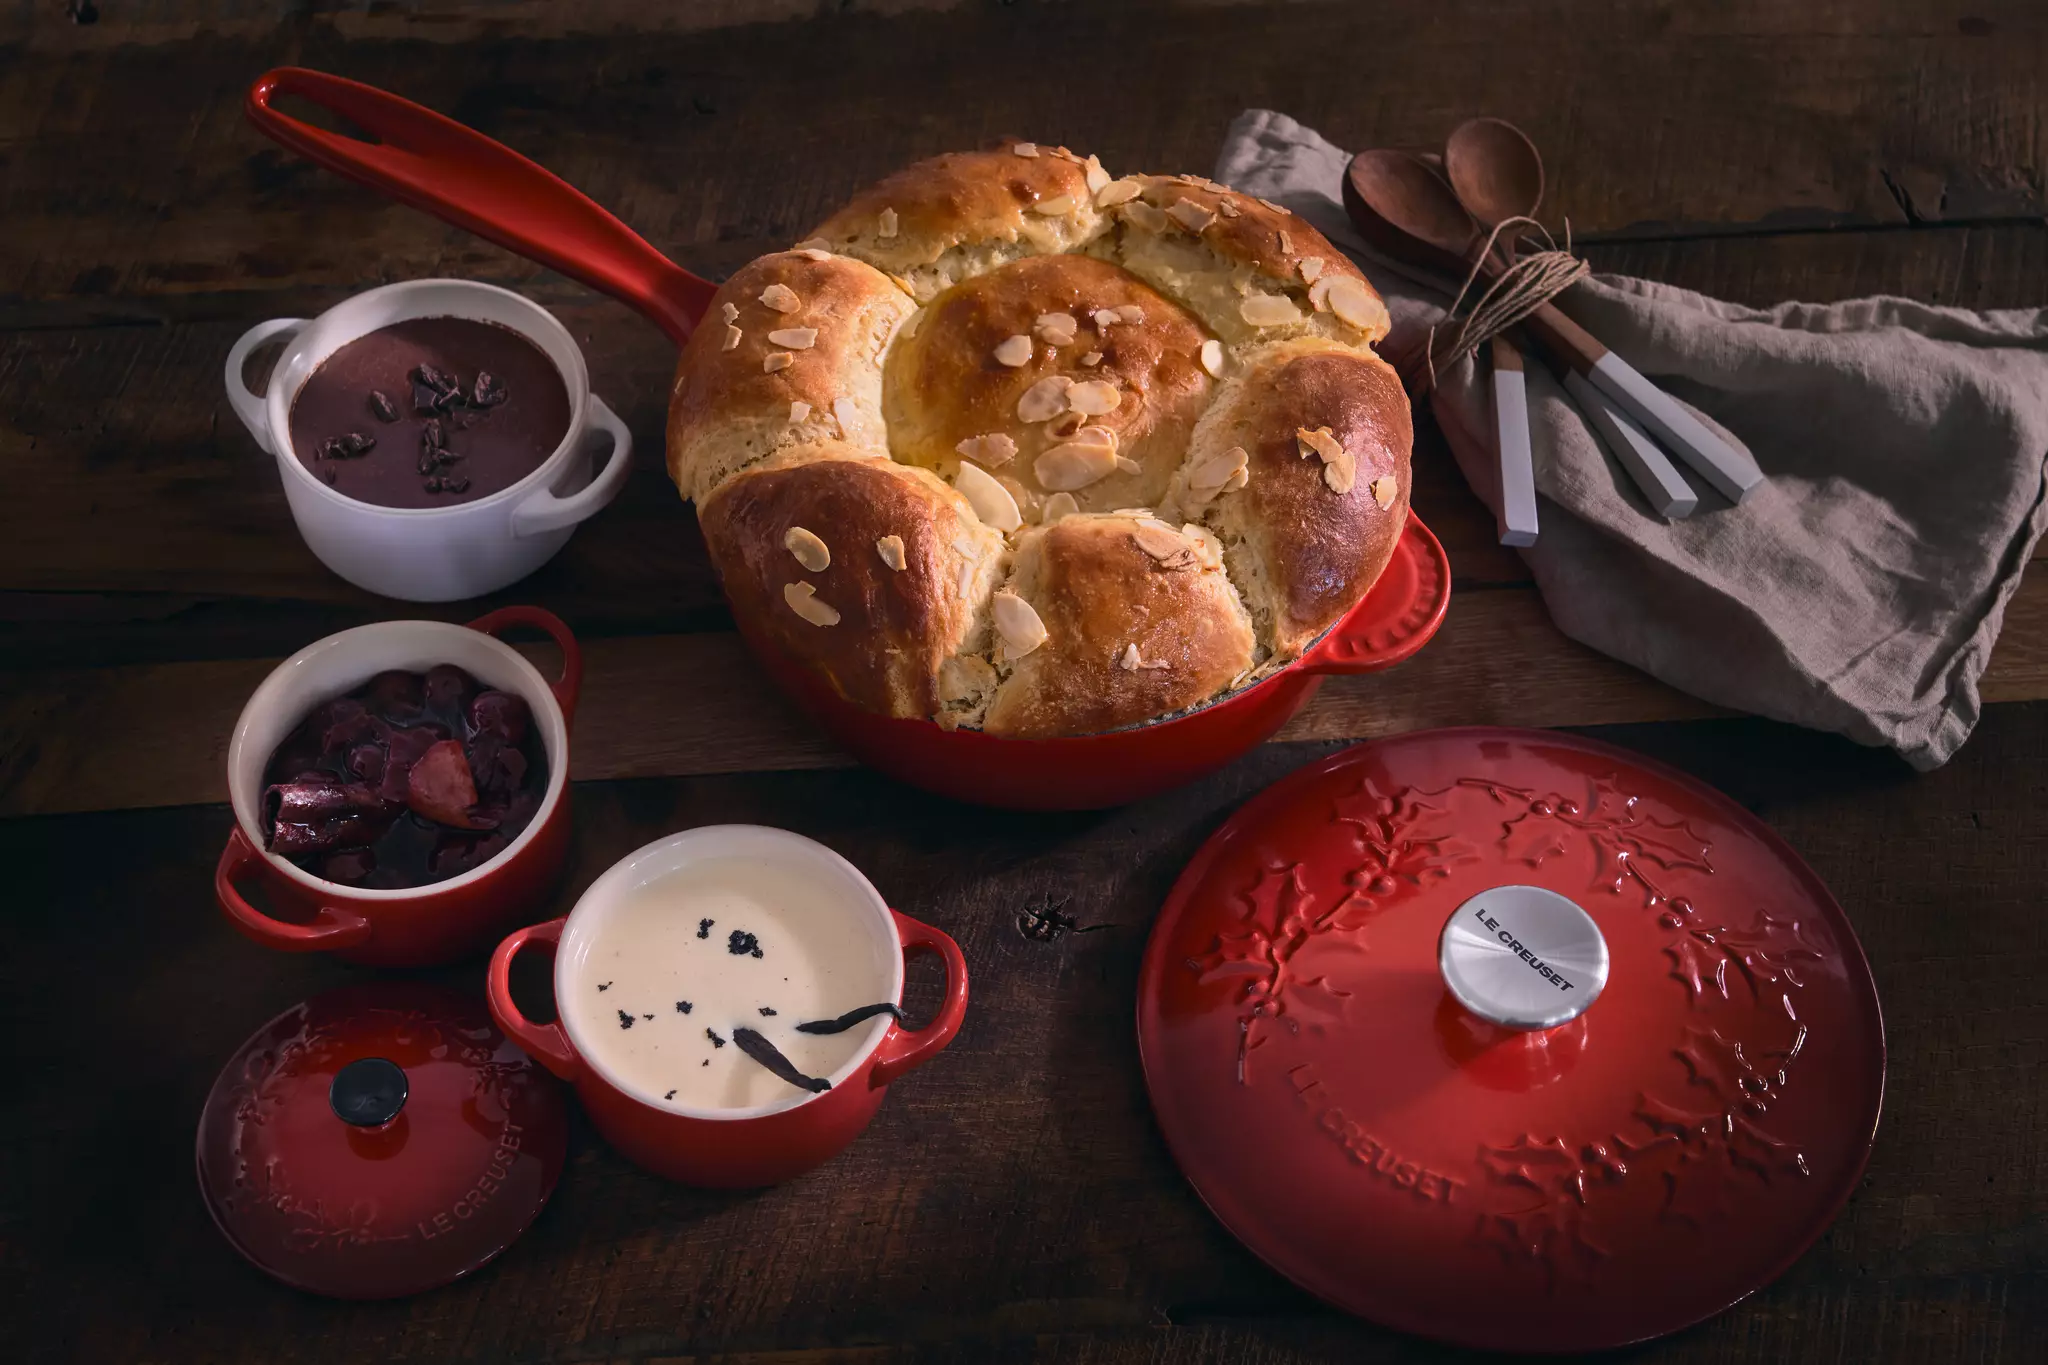 Le Creuset's Holly Collection is here for Christmas (